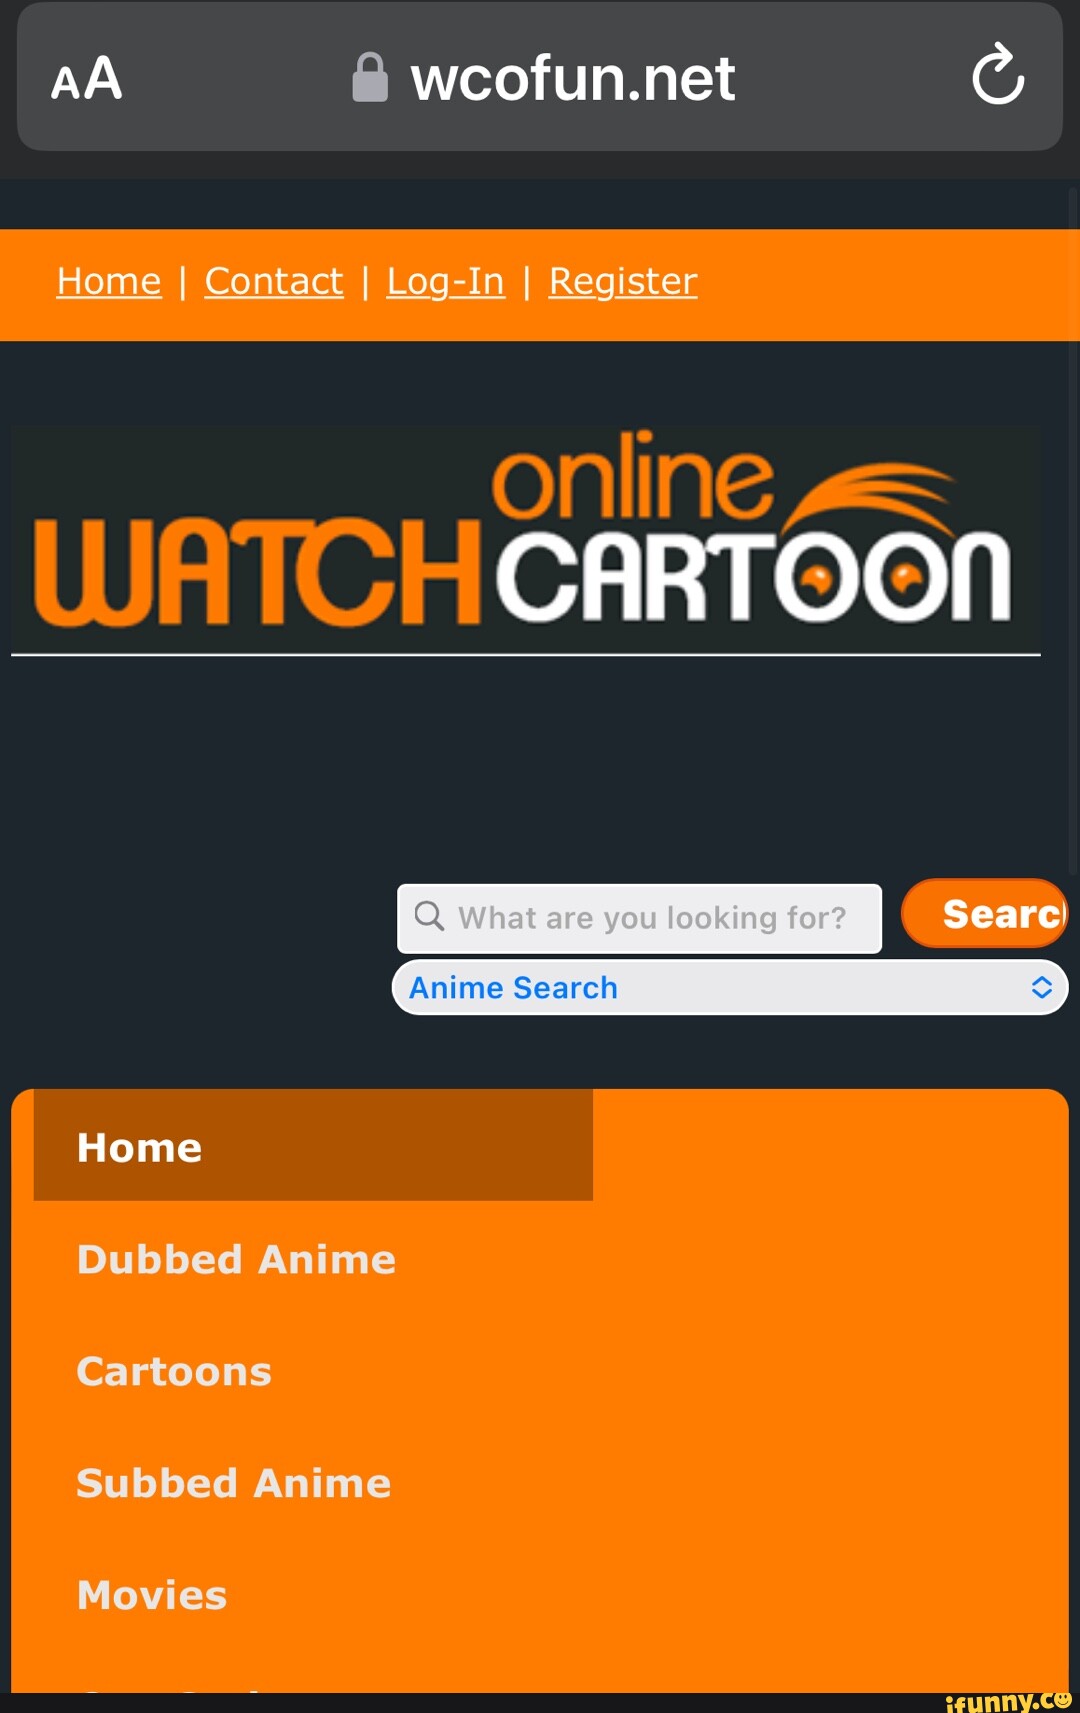 AA  Home I Contact I Log In I Register online CARTOON Q Wheet are  you looking for? (Anime Home Dubbed Anime Cartoons Subbed Anime Movies -  